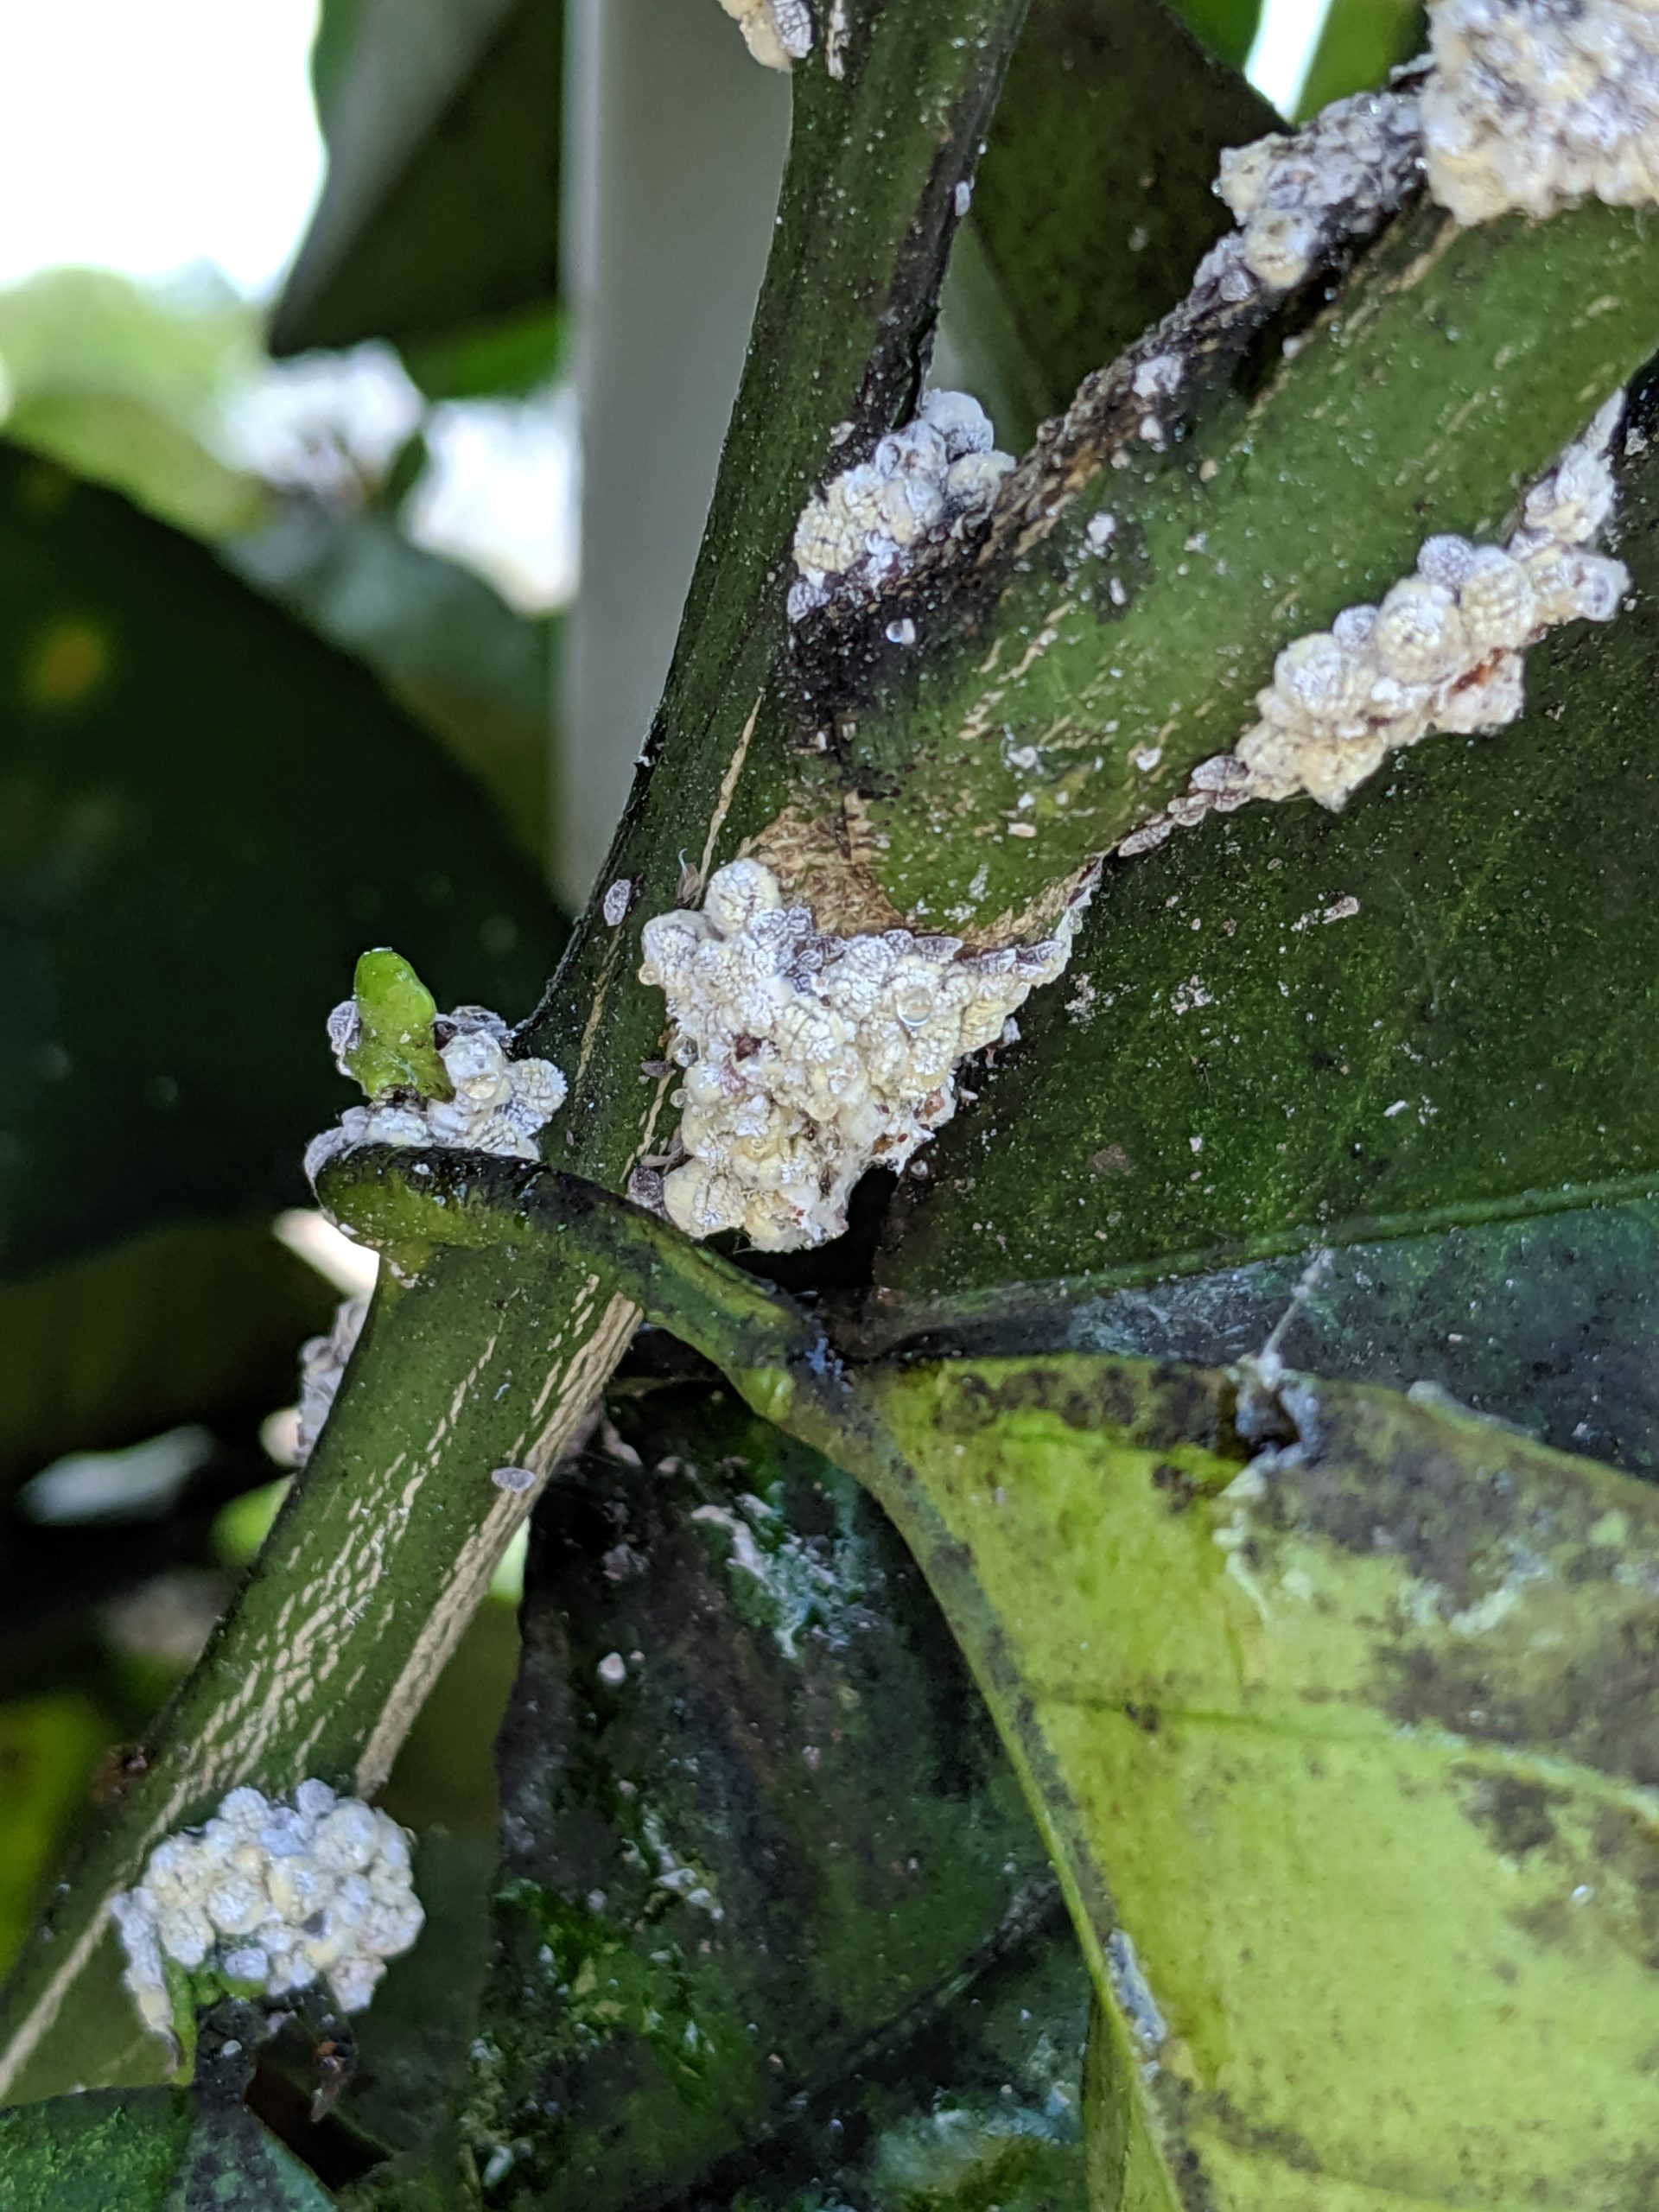 Featured image for “Georgia Citrus Growers: Be on the Lookout for Lebbeck Mealybug”